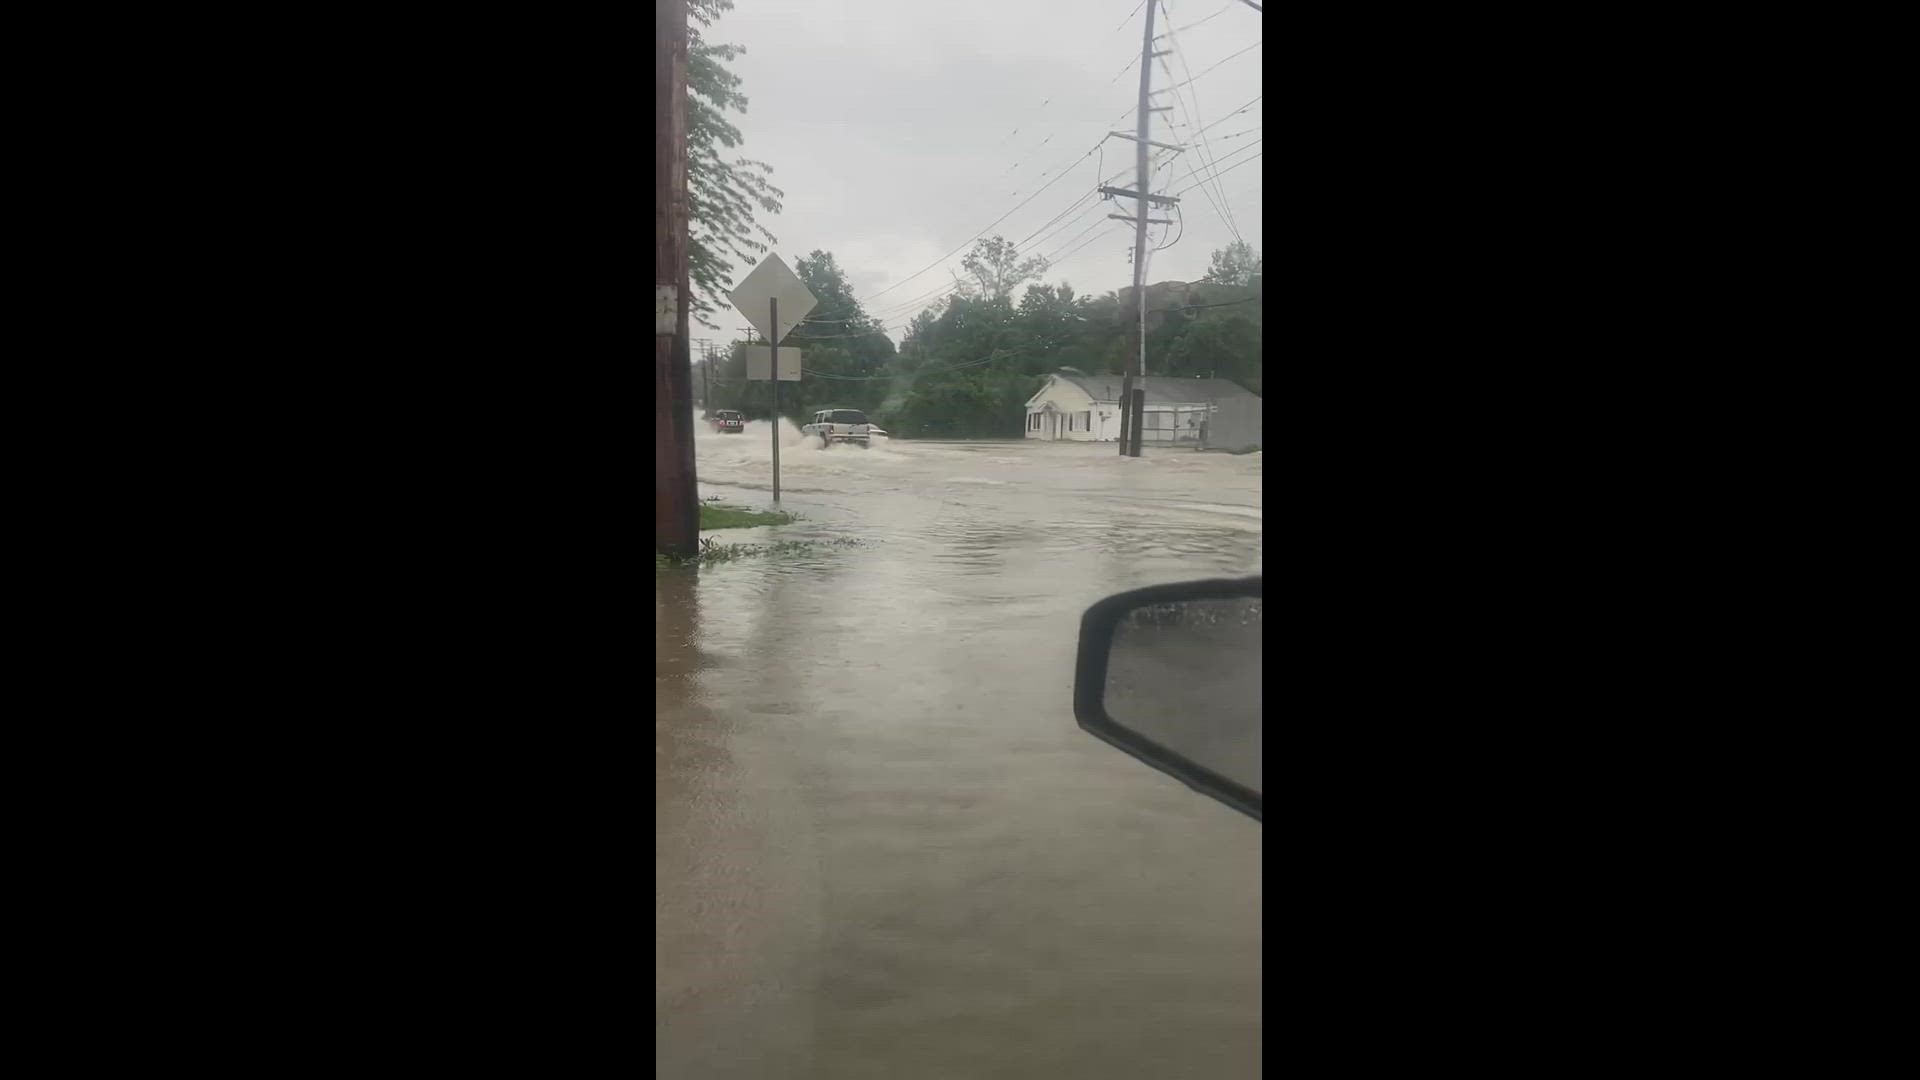 Cars drive through flooded roads in the Oakland area in St. Louis County Thursday morning. This is near Big Bend and Sanders. Credit: Hannah Lagermann